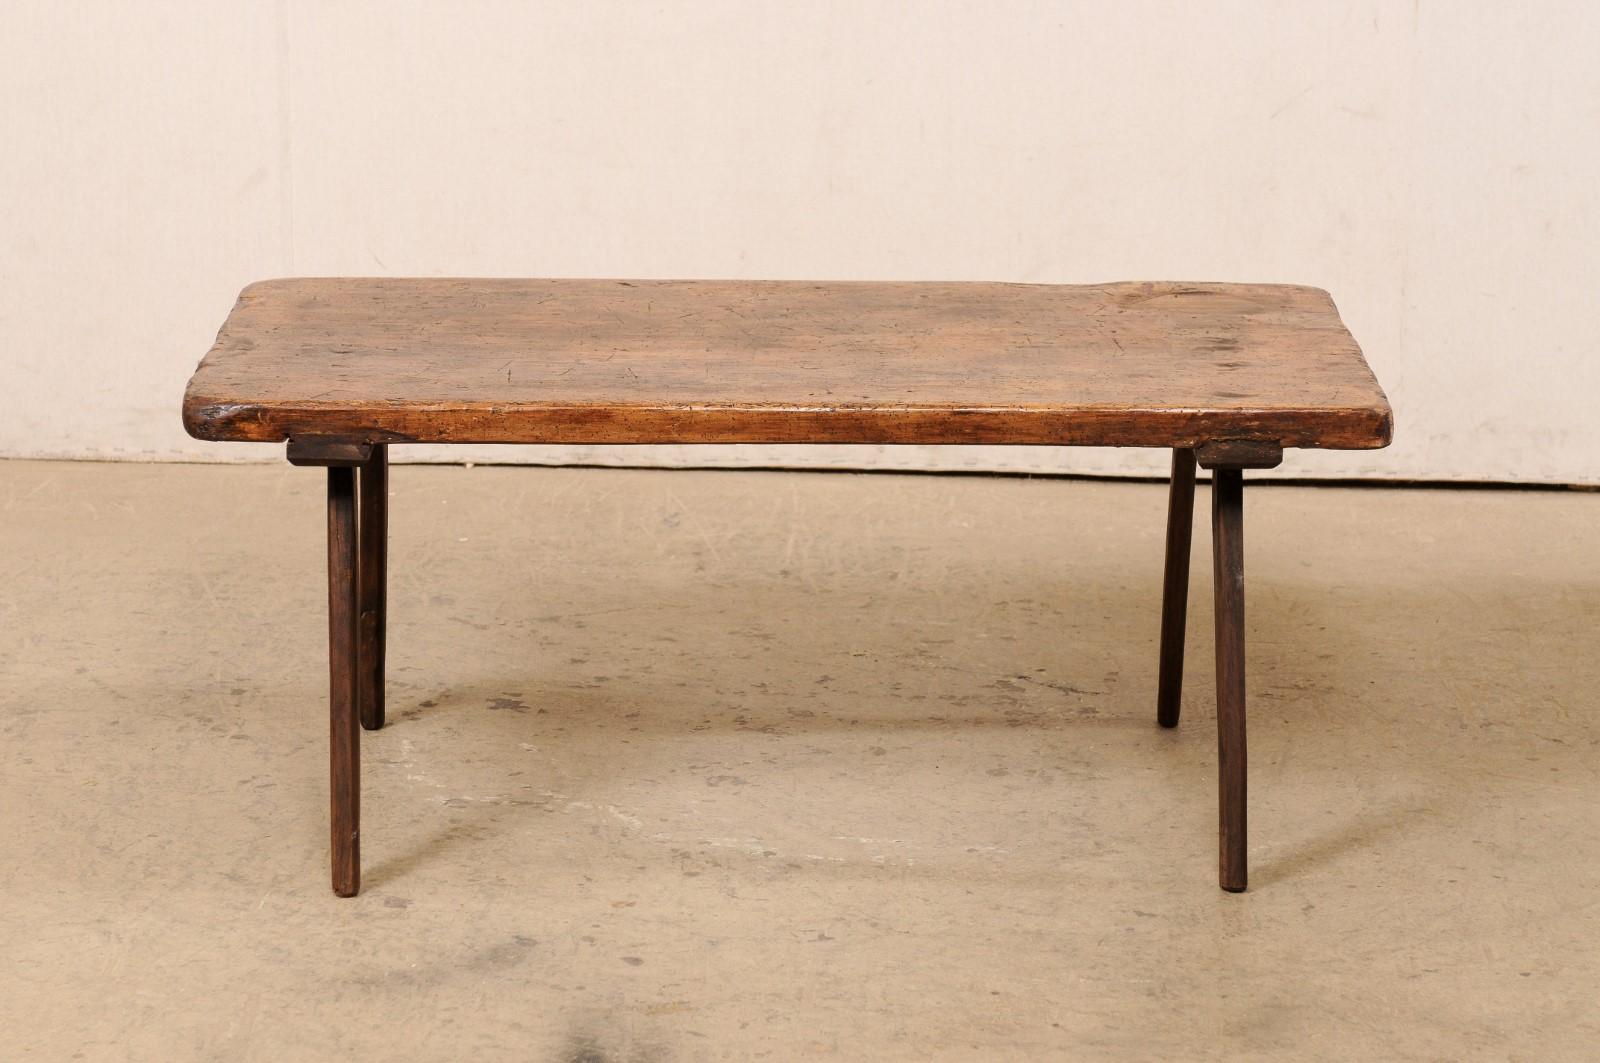 Spanish Rustic Wood Rectangular-Shaped Single Board Top Coffee Table, 19th C. For Sale 7